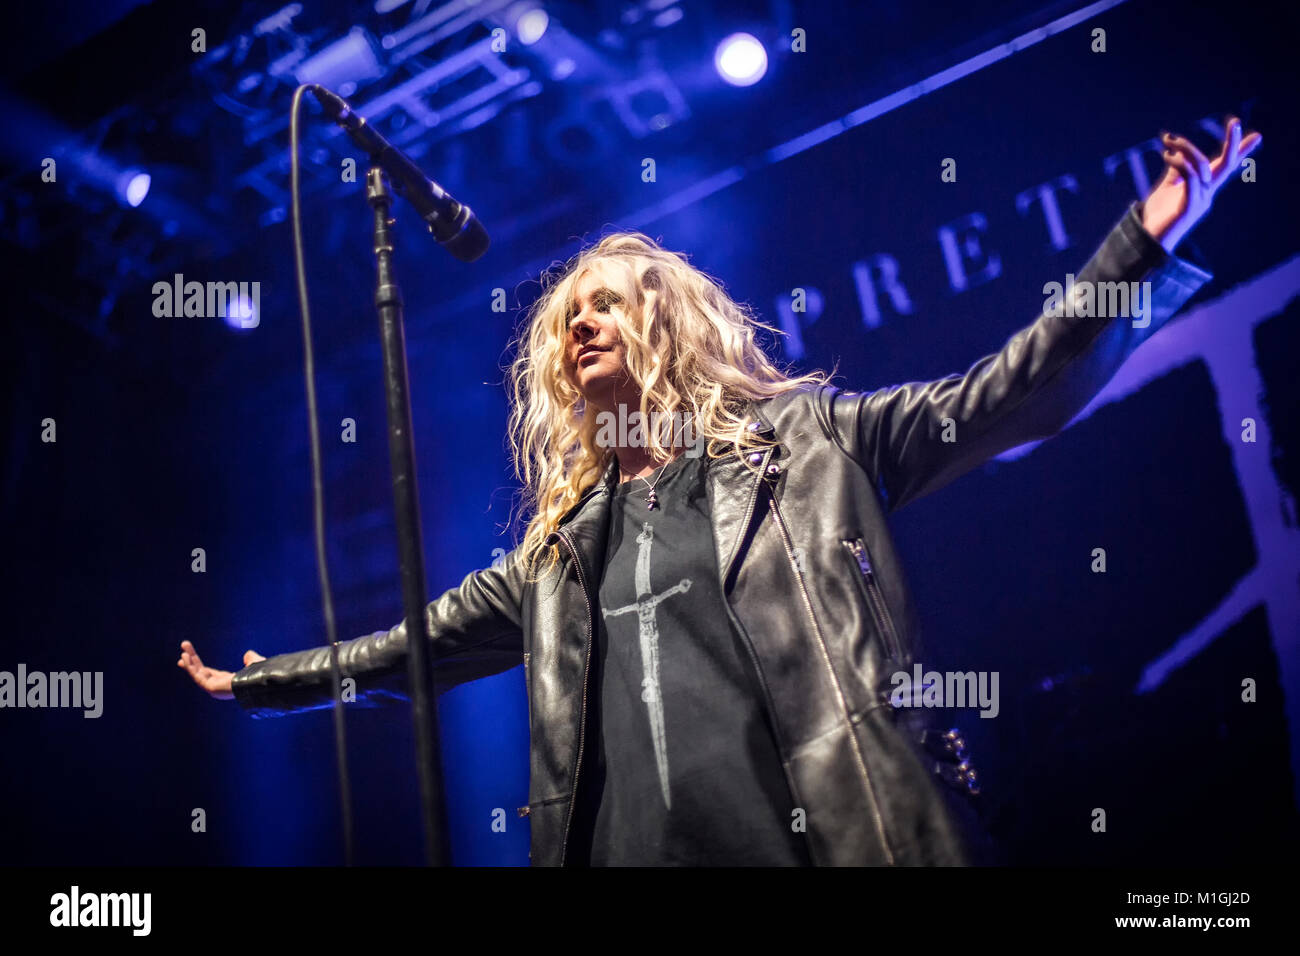 Norway, Oslo - November 17, 2017. The American rock band The Pretty Reckless performs a live concert Sentrum Scene in Oslo. Here vocalist Taylor Momsen is seen live on stage. (Photo credit: Gonzales Photo - Terje Dokken). Stock Photo